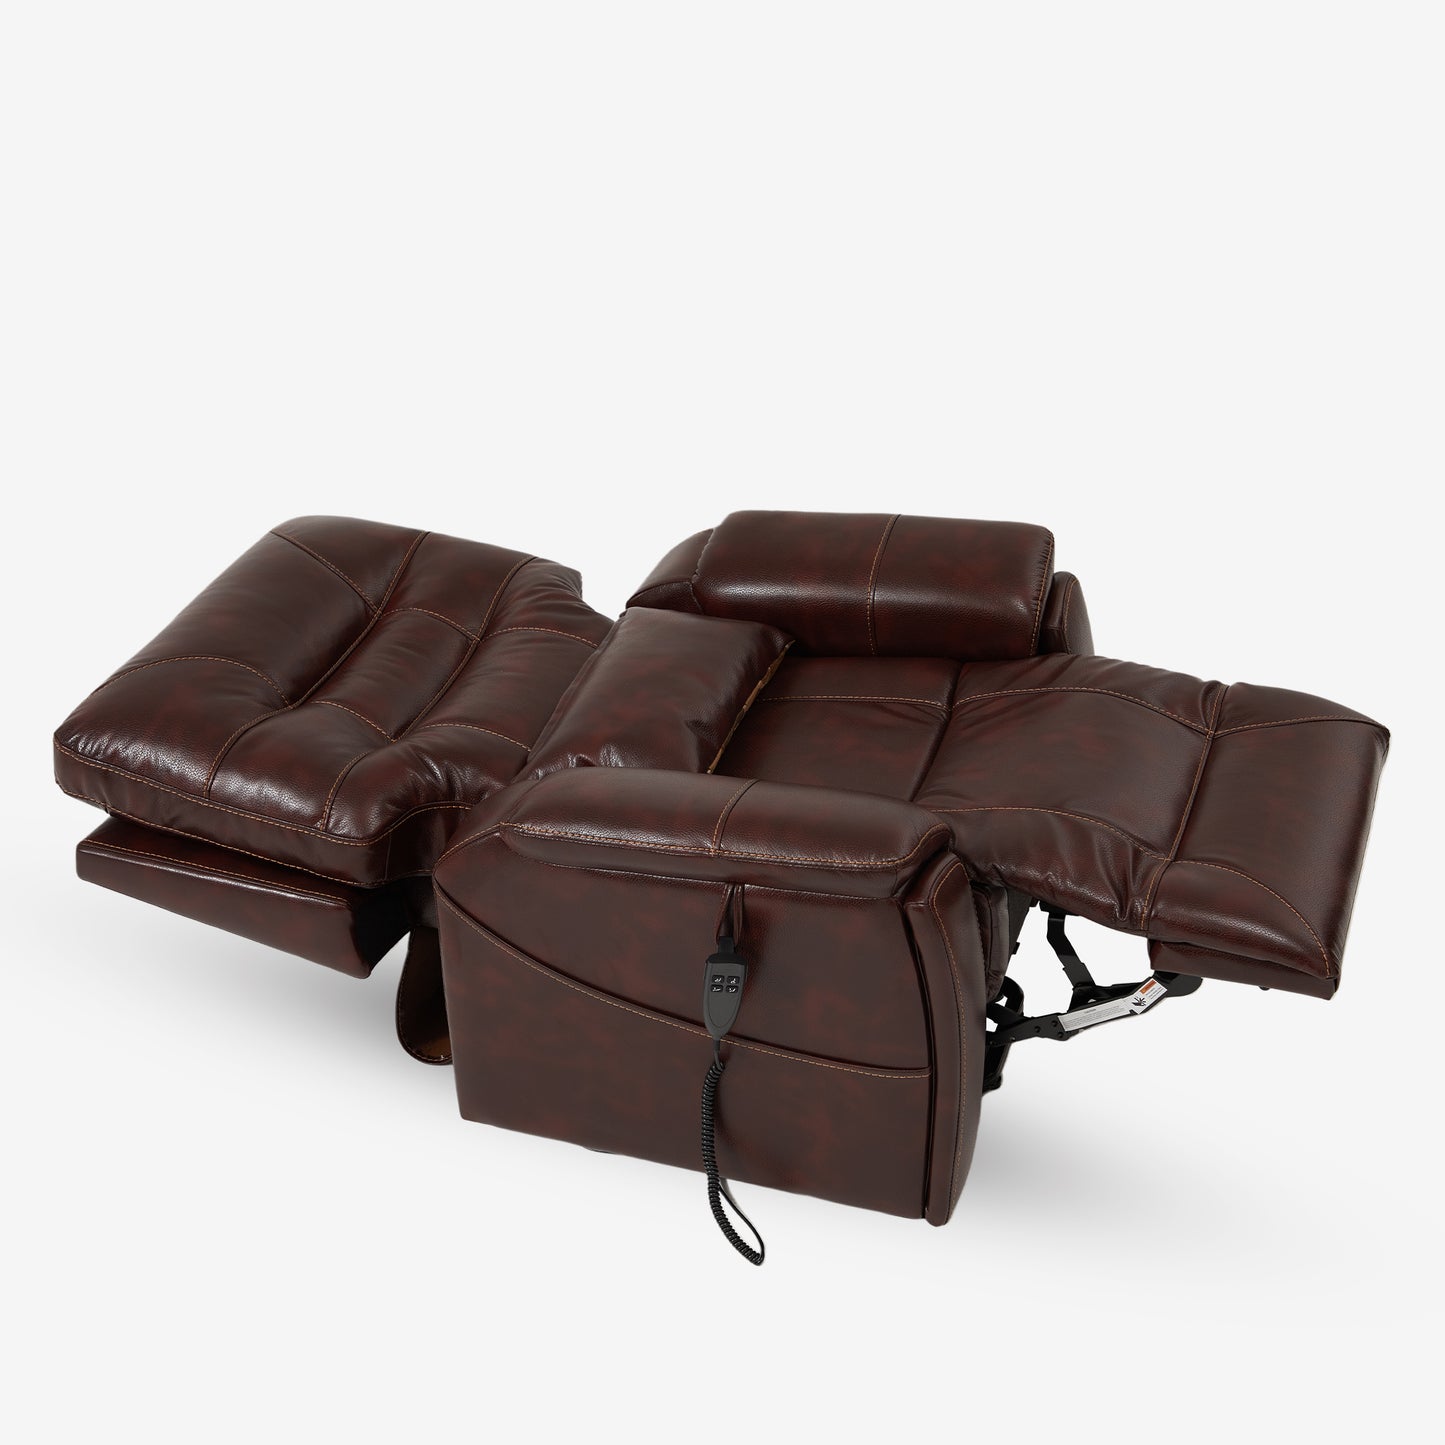 9206 Power Lift Lay Flat Recliner With Pull-Out Cup Holder(Large, Faux Leather Red Brown)